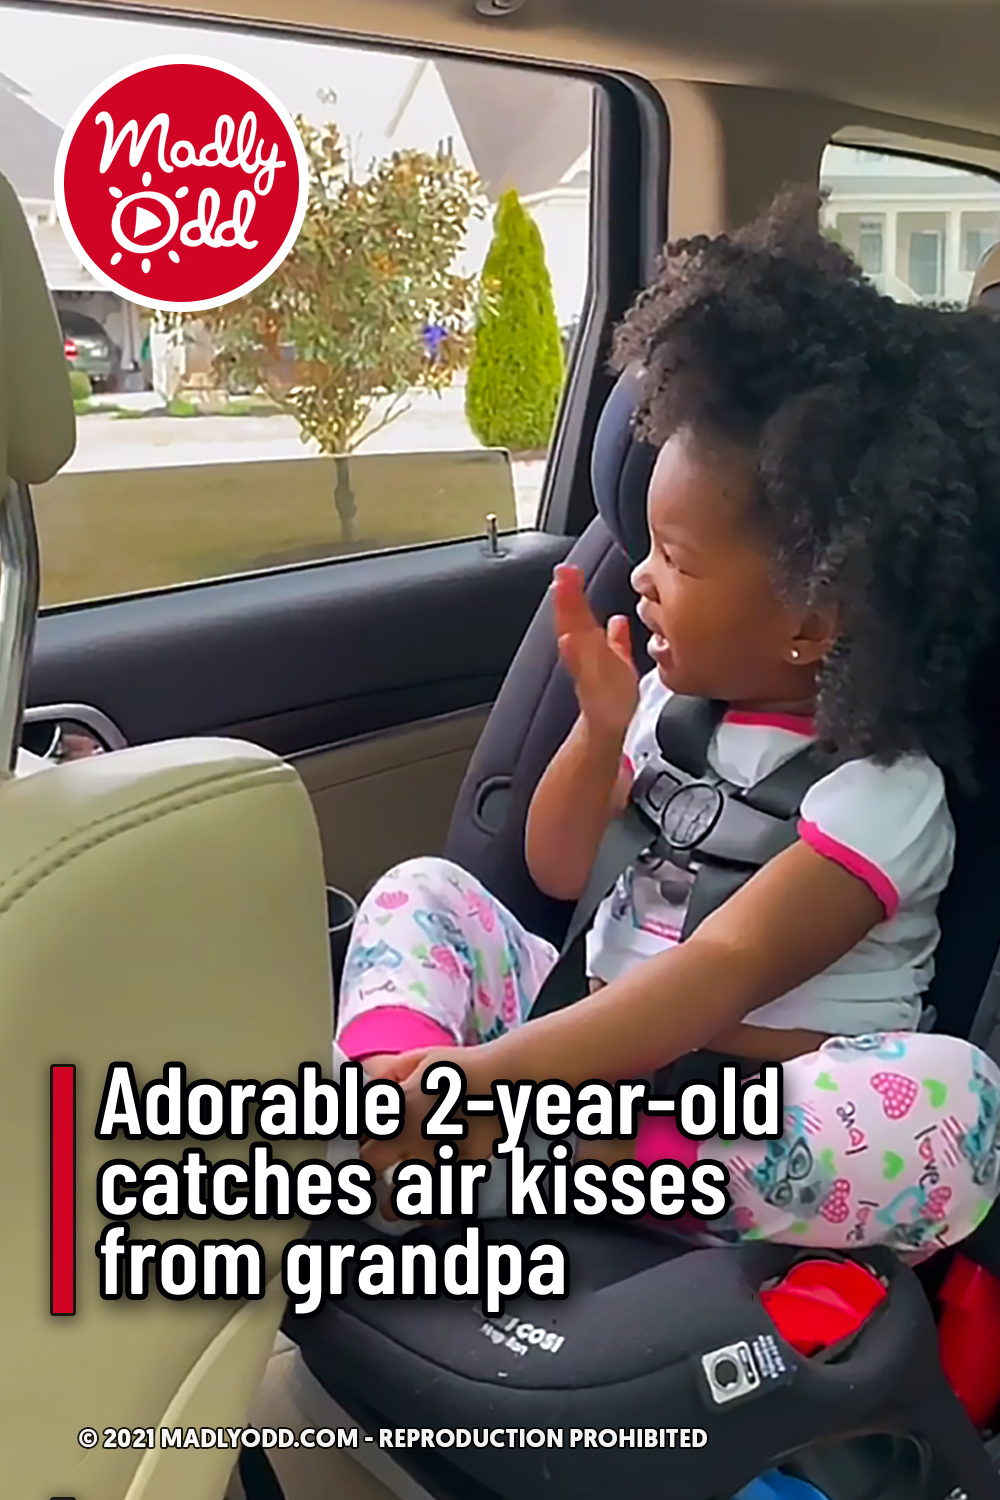 Adorable 2-year-old catches air kisses from grandpa